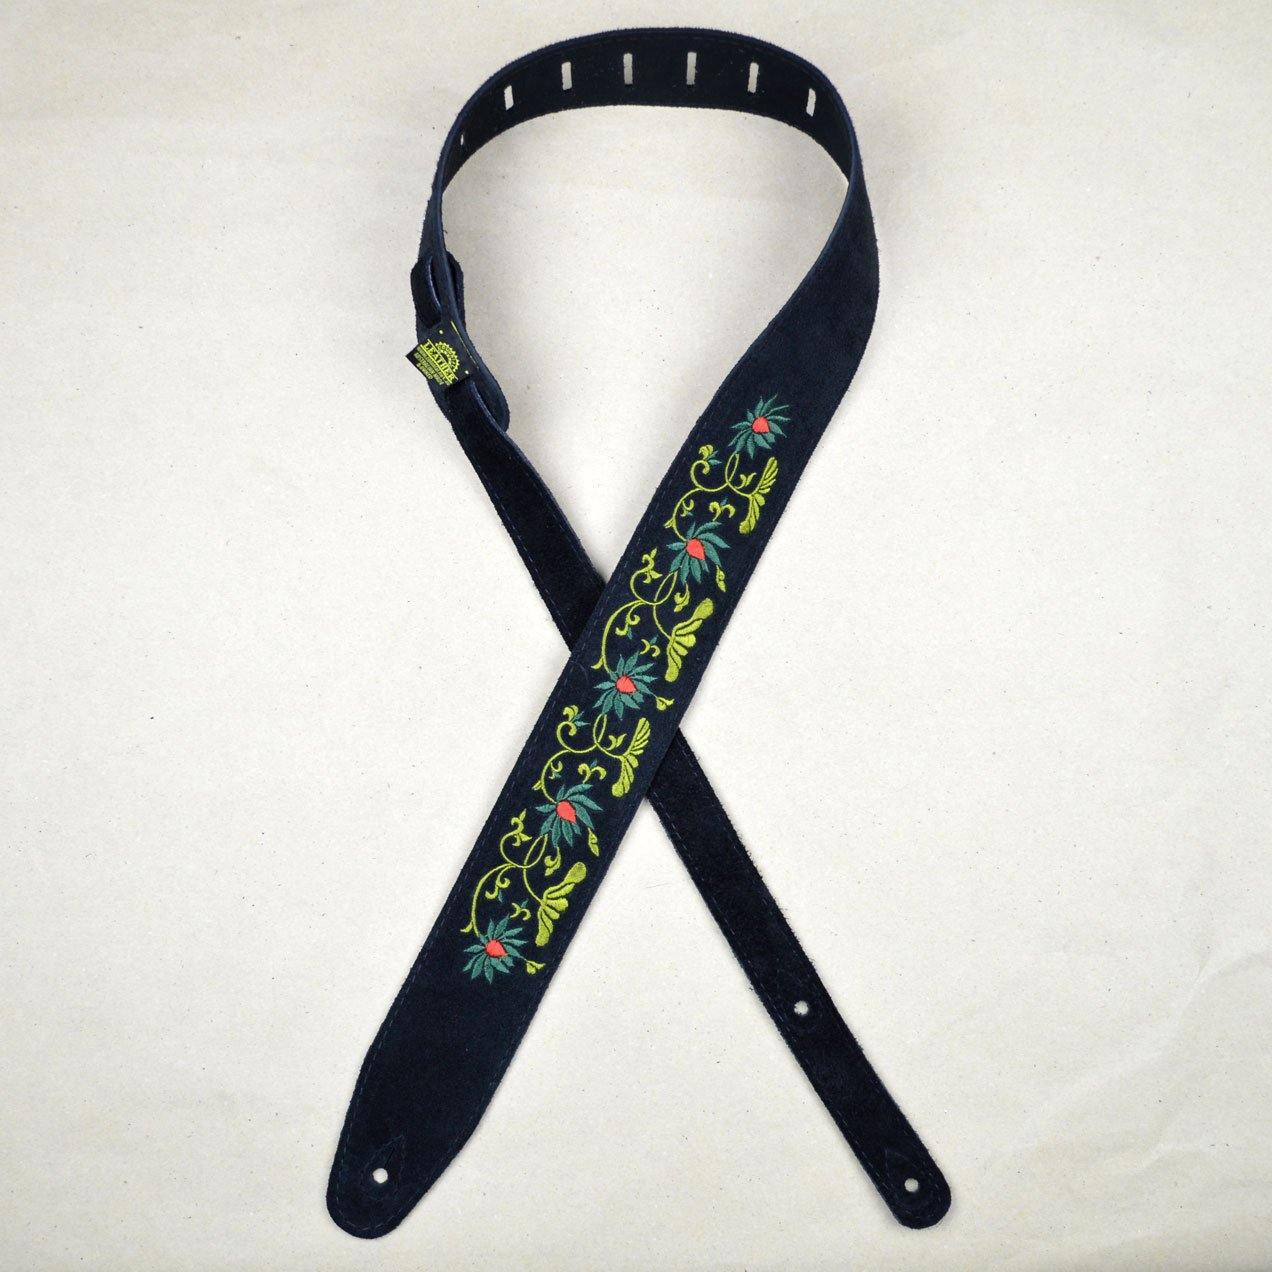 Flower and Leaves Embroidered Black Suede Guitar Strap - Straps by Colonial Leather at Muso's Stuff